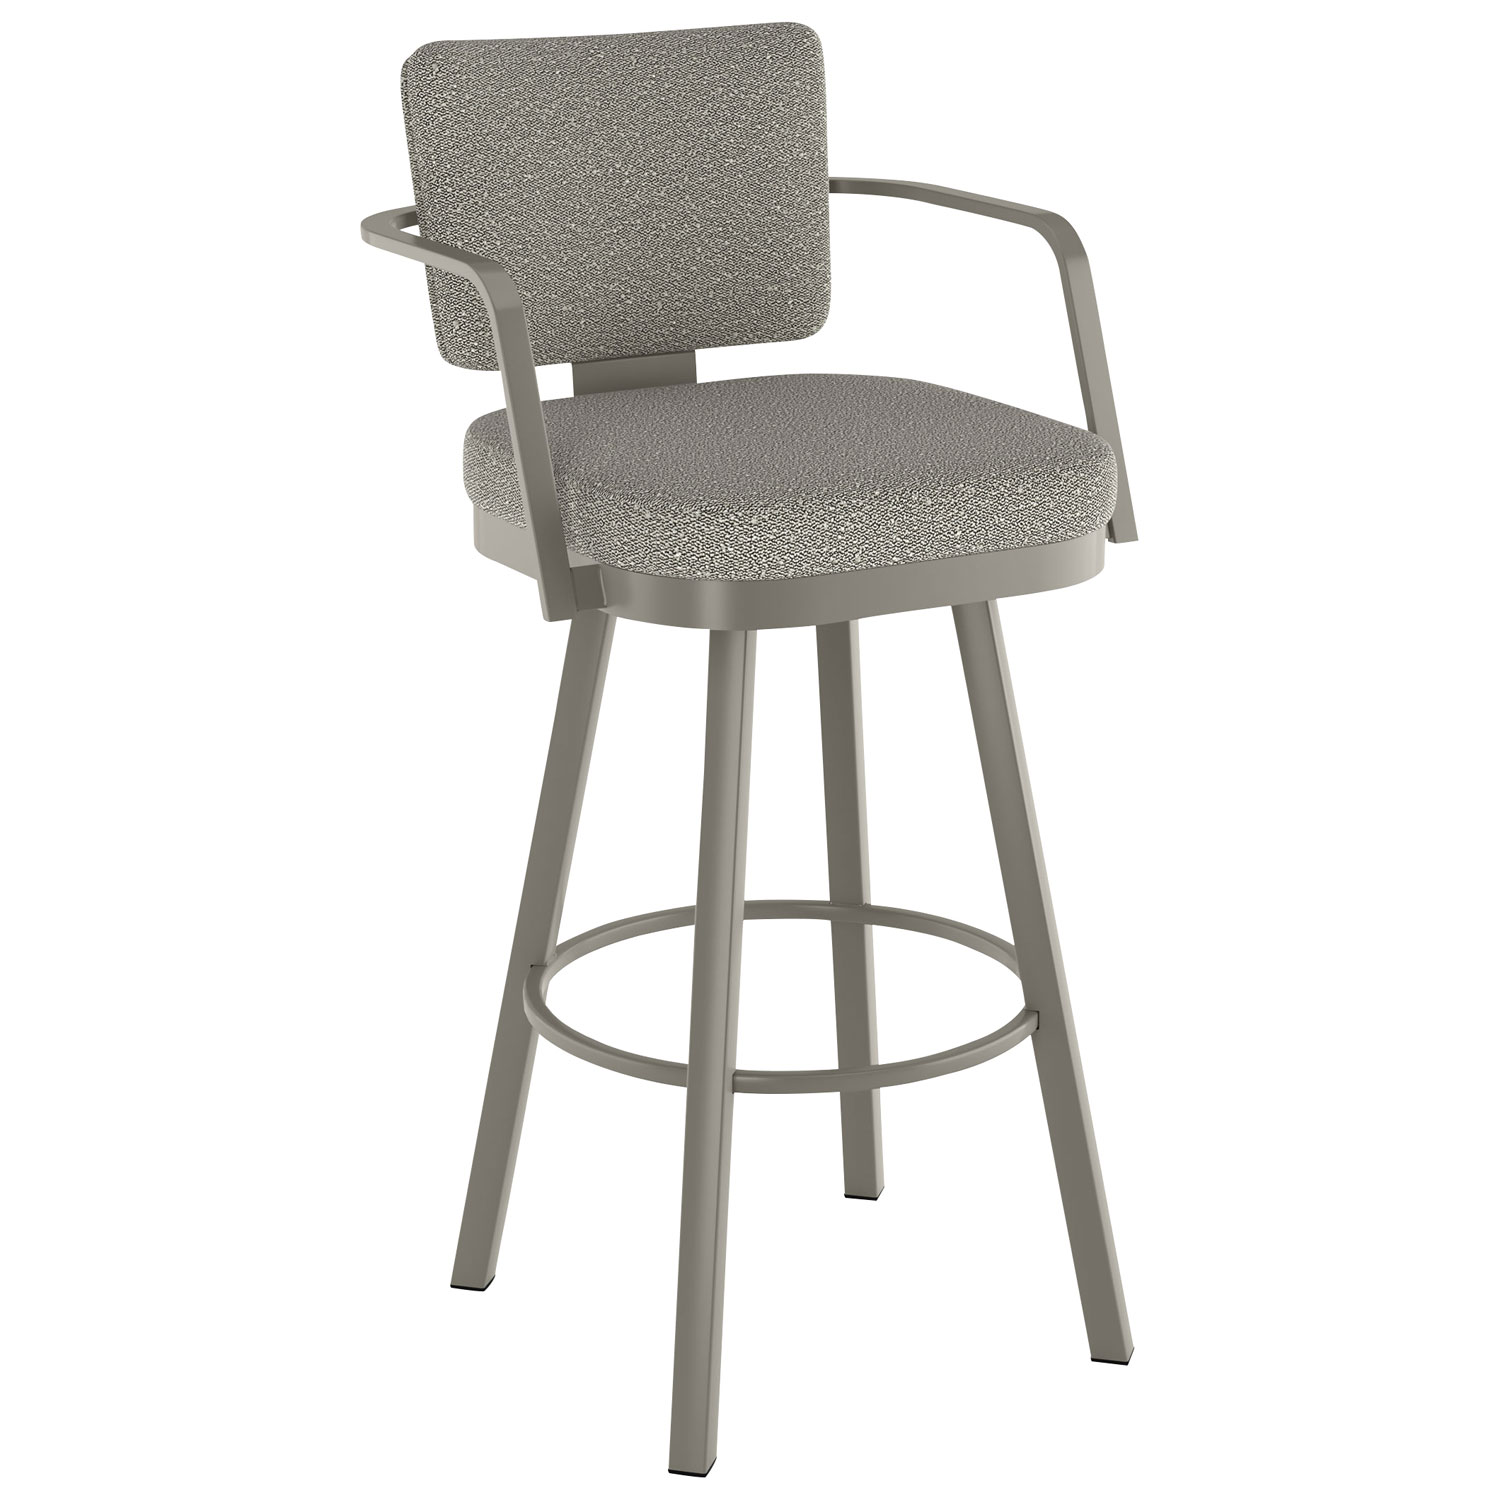 Thea Rustic Country Bar Height Barstool - Beige Grey Boucle/Grey